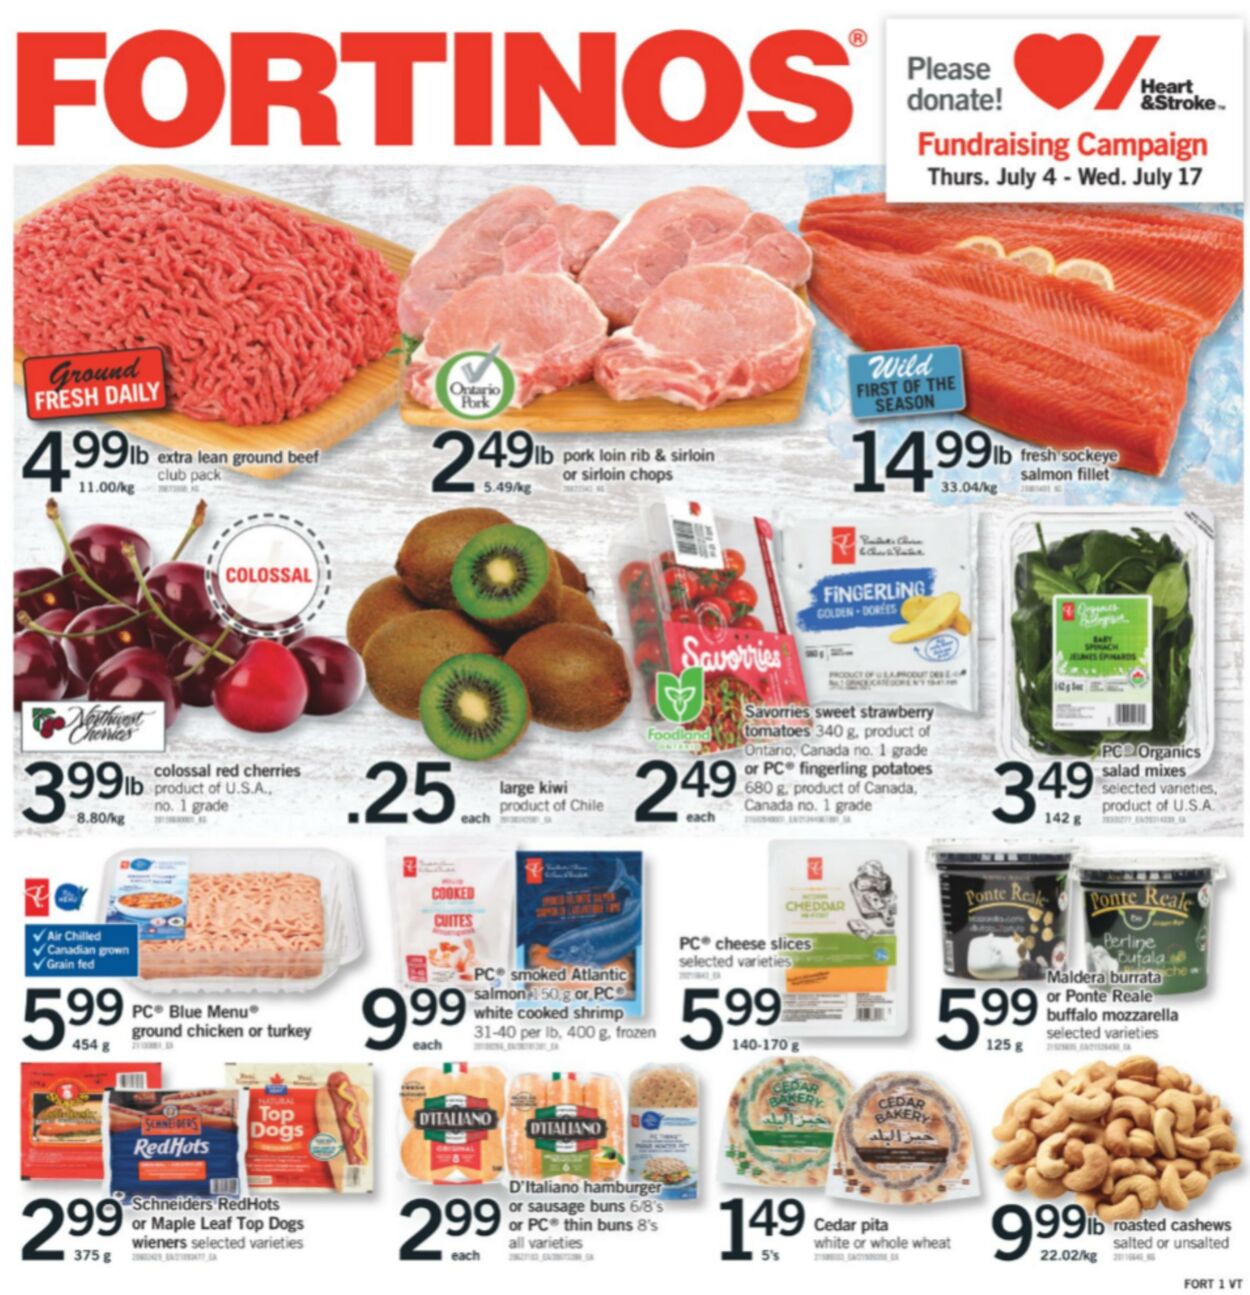 Fortinos Promotional flyers